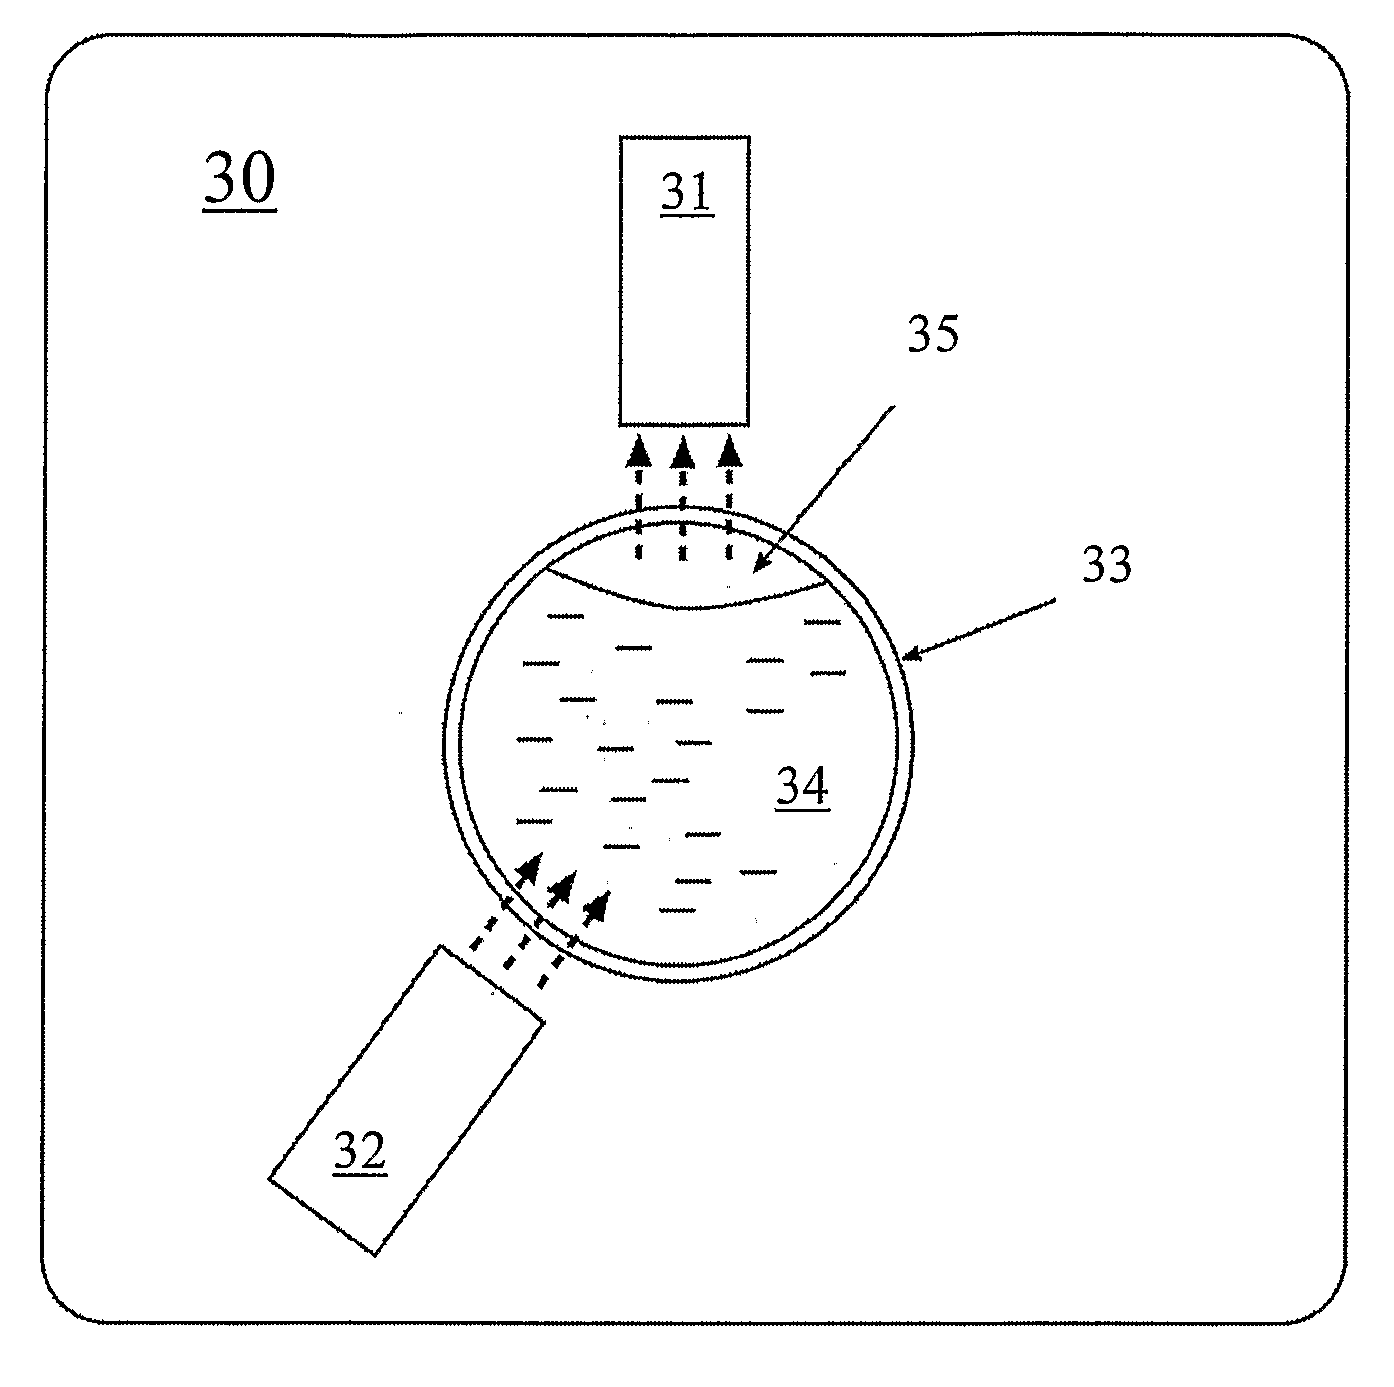 Method and Device for Detecting Estrus